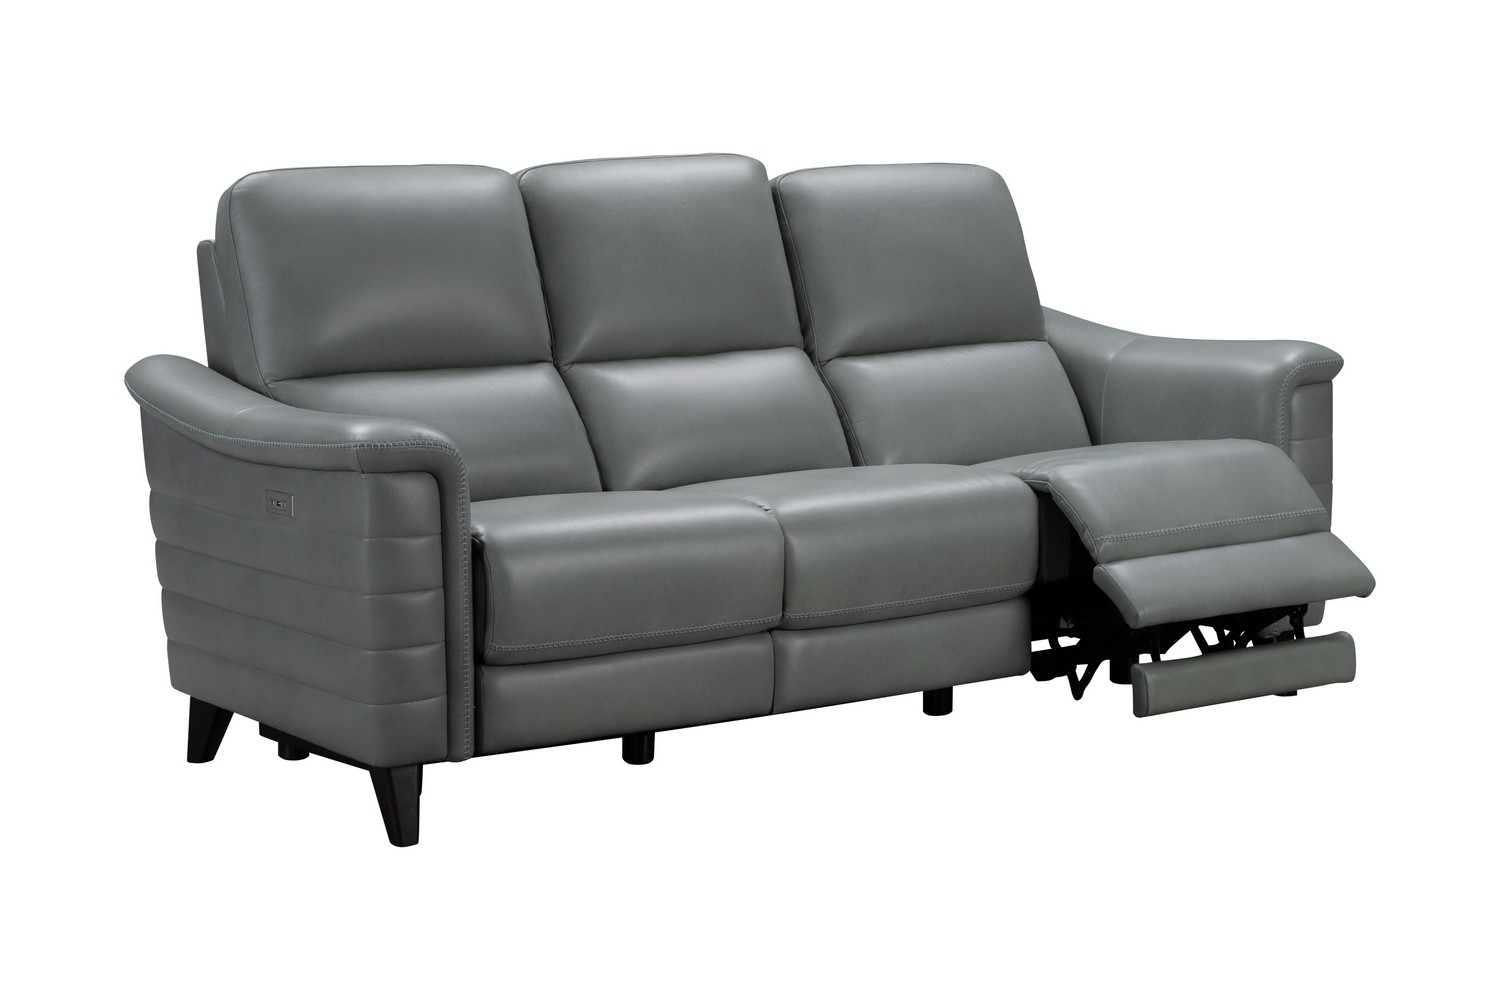 Barcalounger Malone Power Reclining Sofa with Power Head Rests - Antonio Green Gray/Leather Match